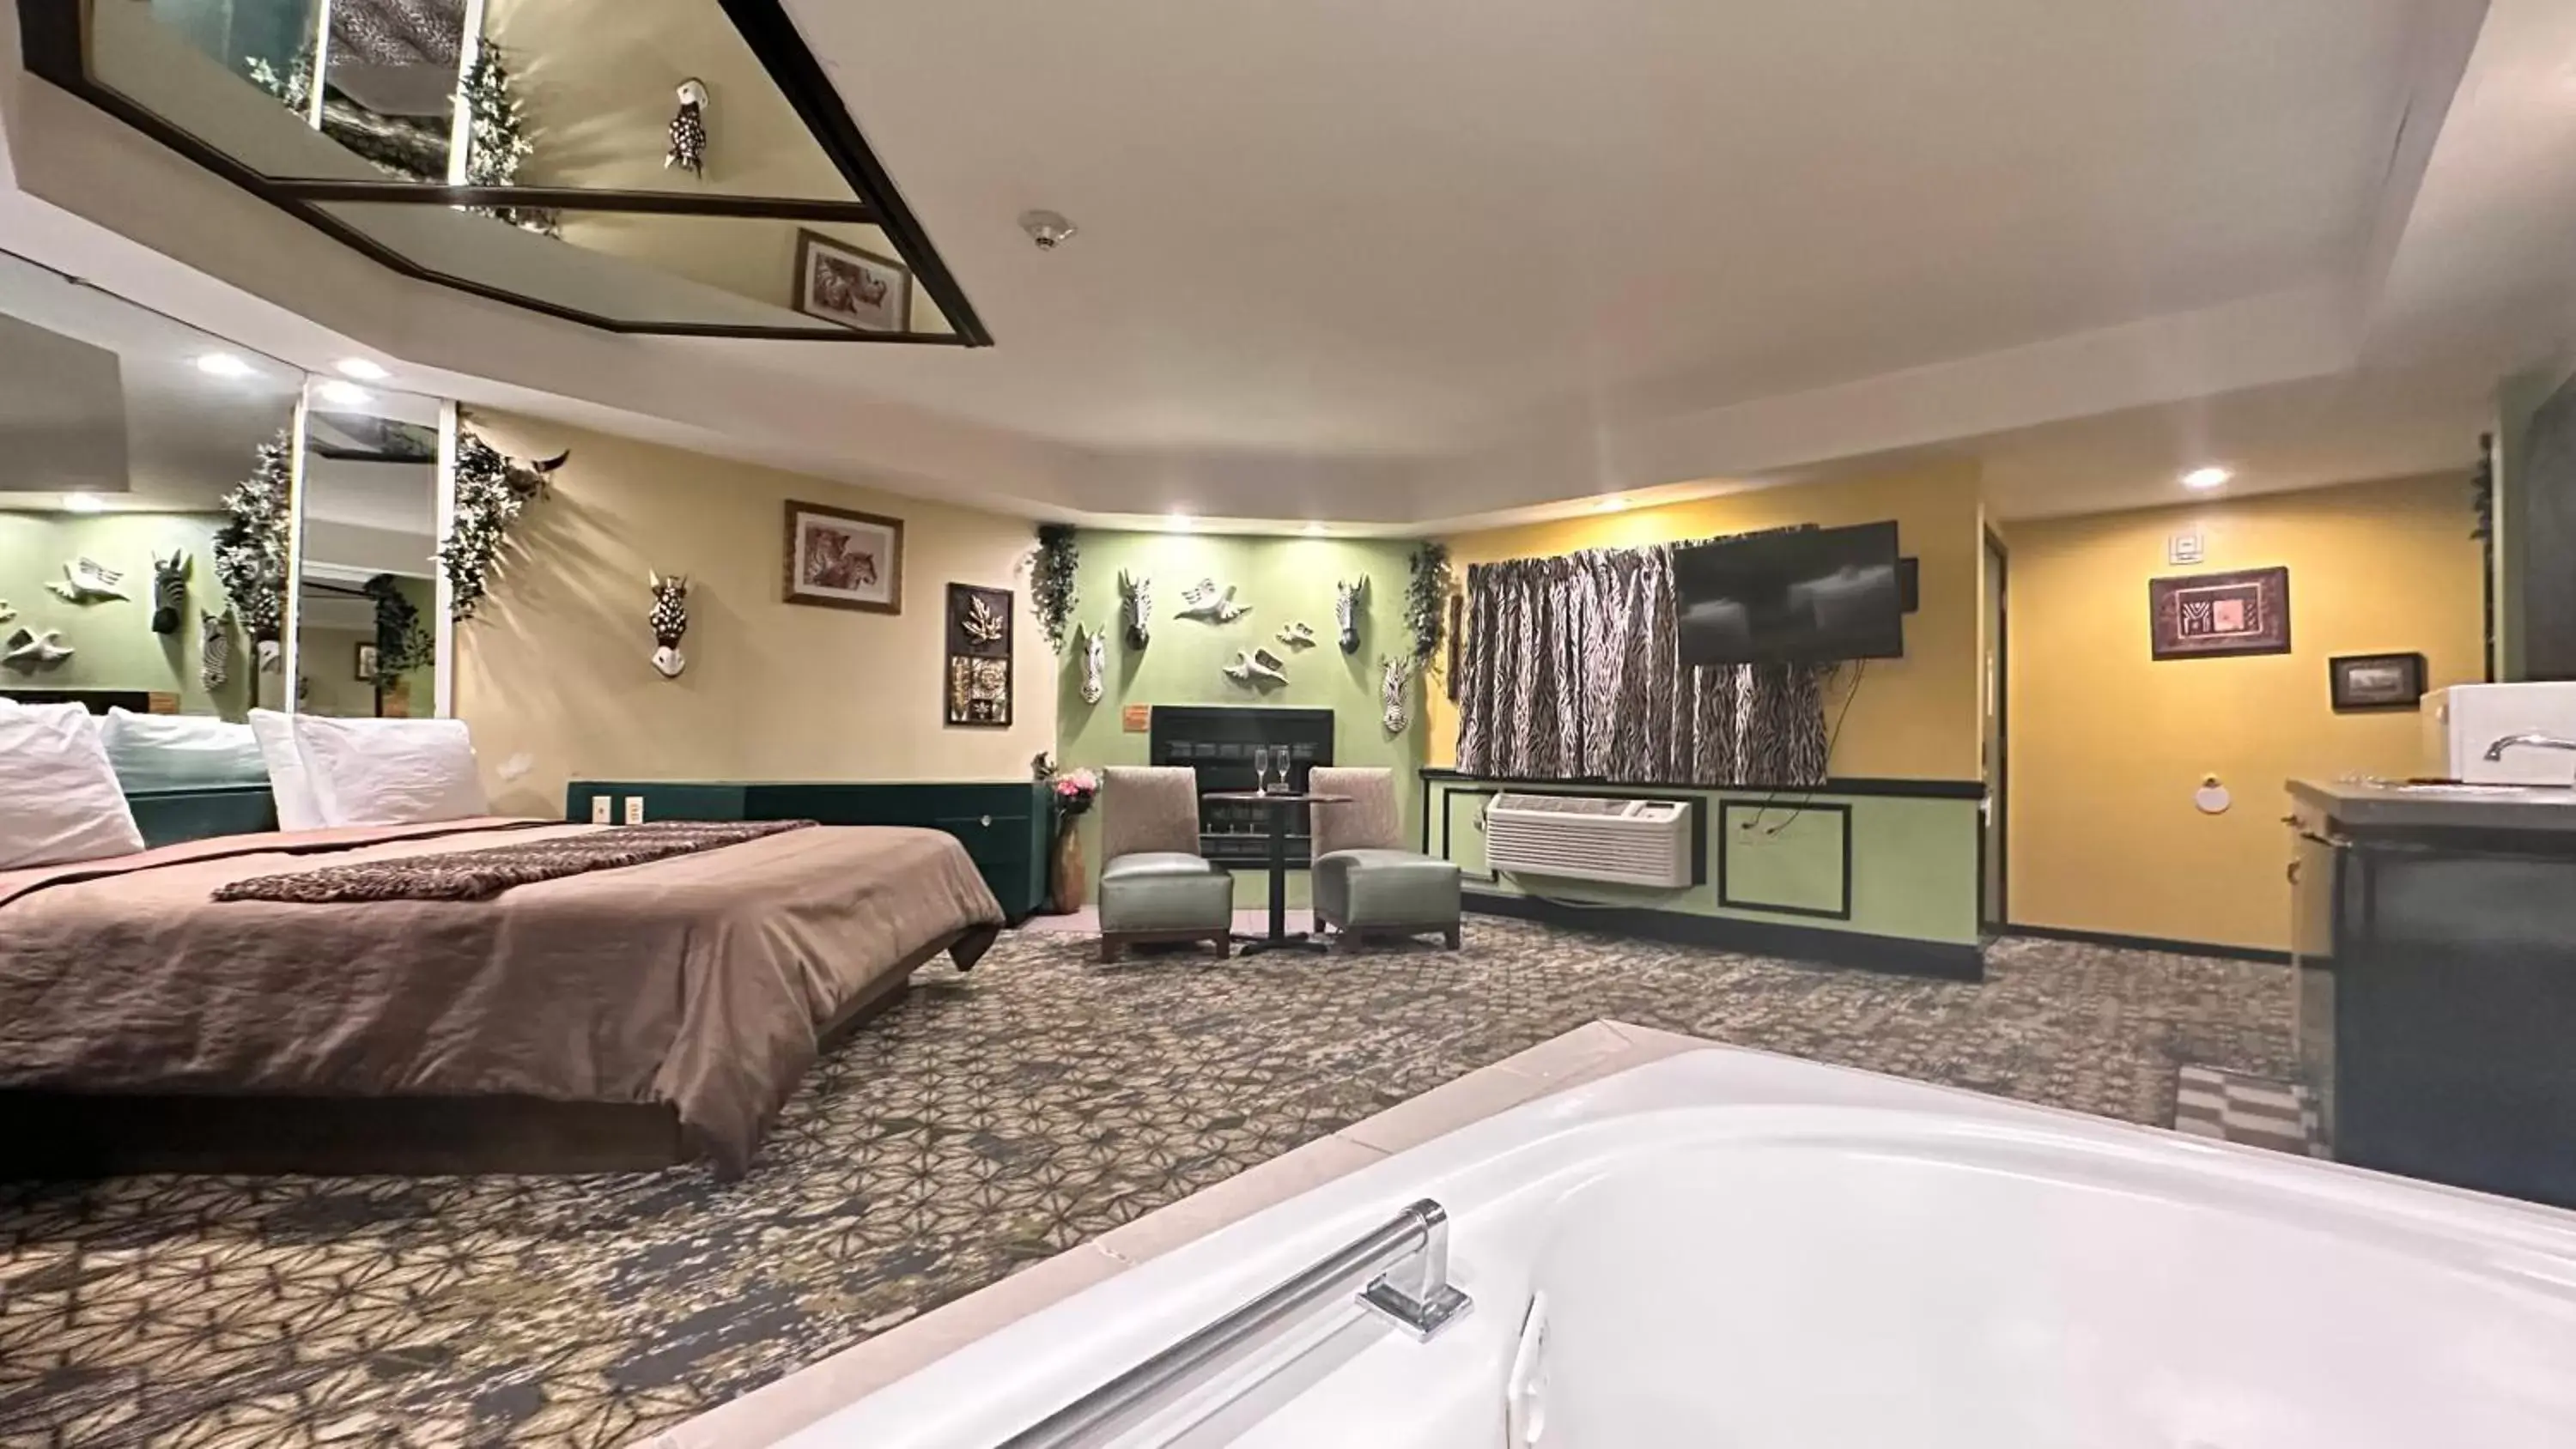 Inn of the Dove Romantic Luxury Suites with Jacuzzi & Fireplace at Harrisburg-Hershey, PA